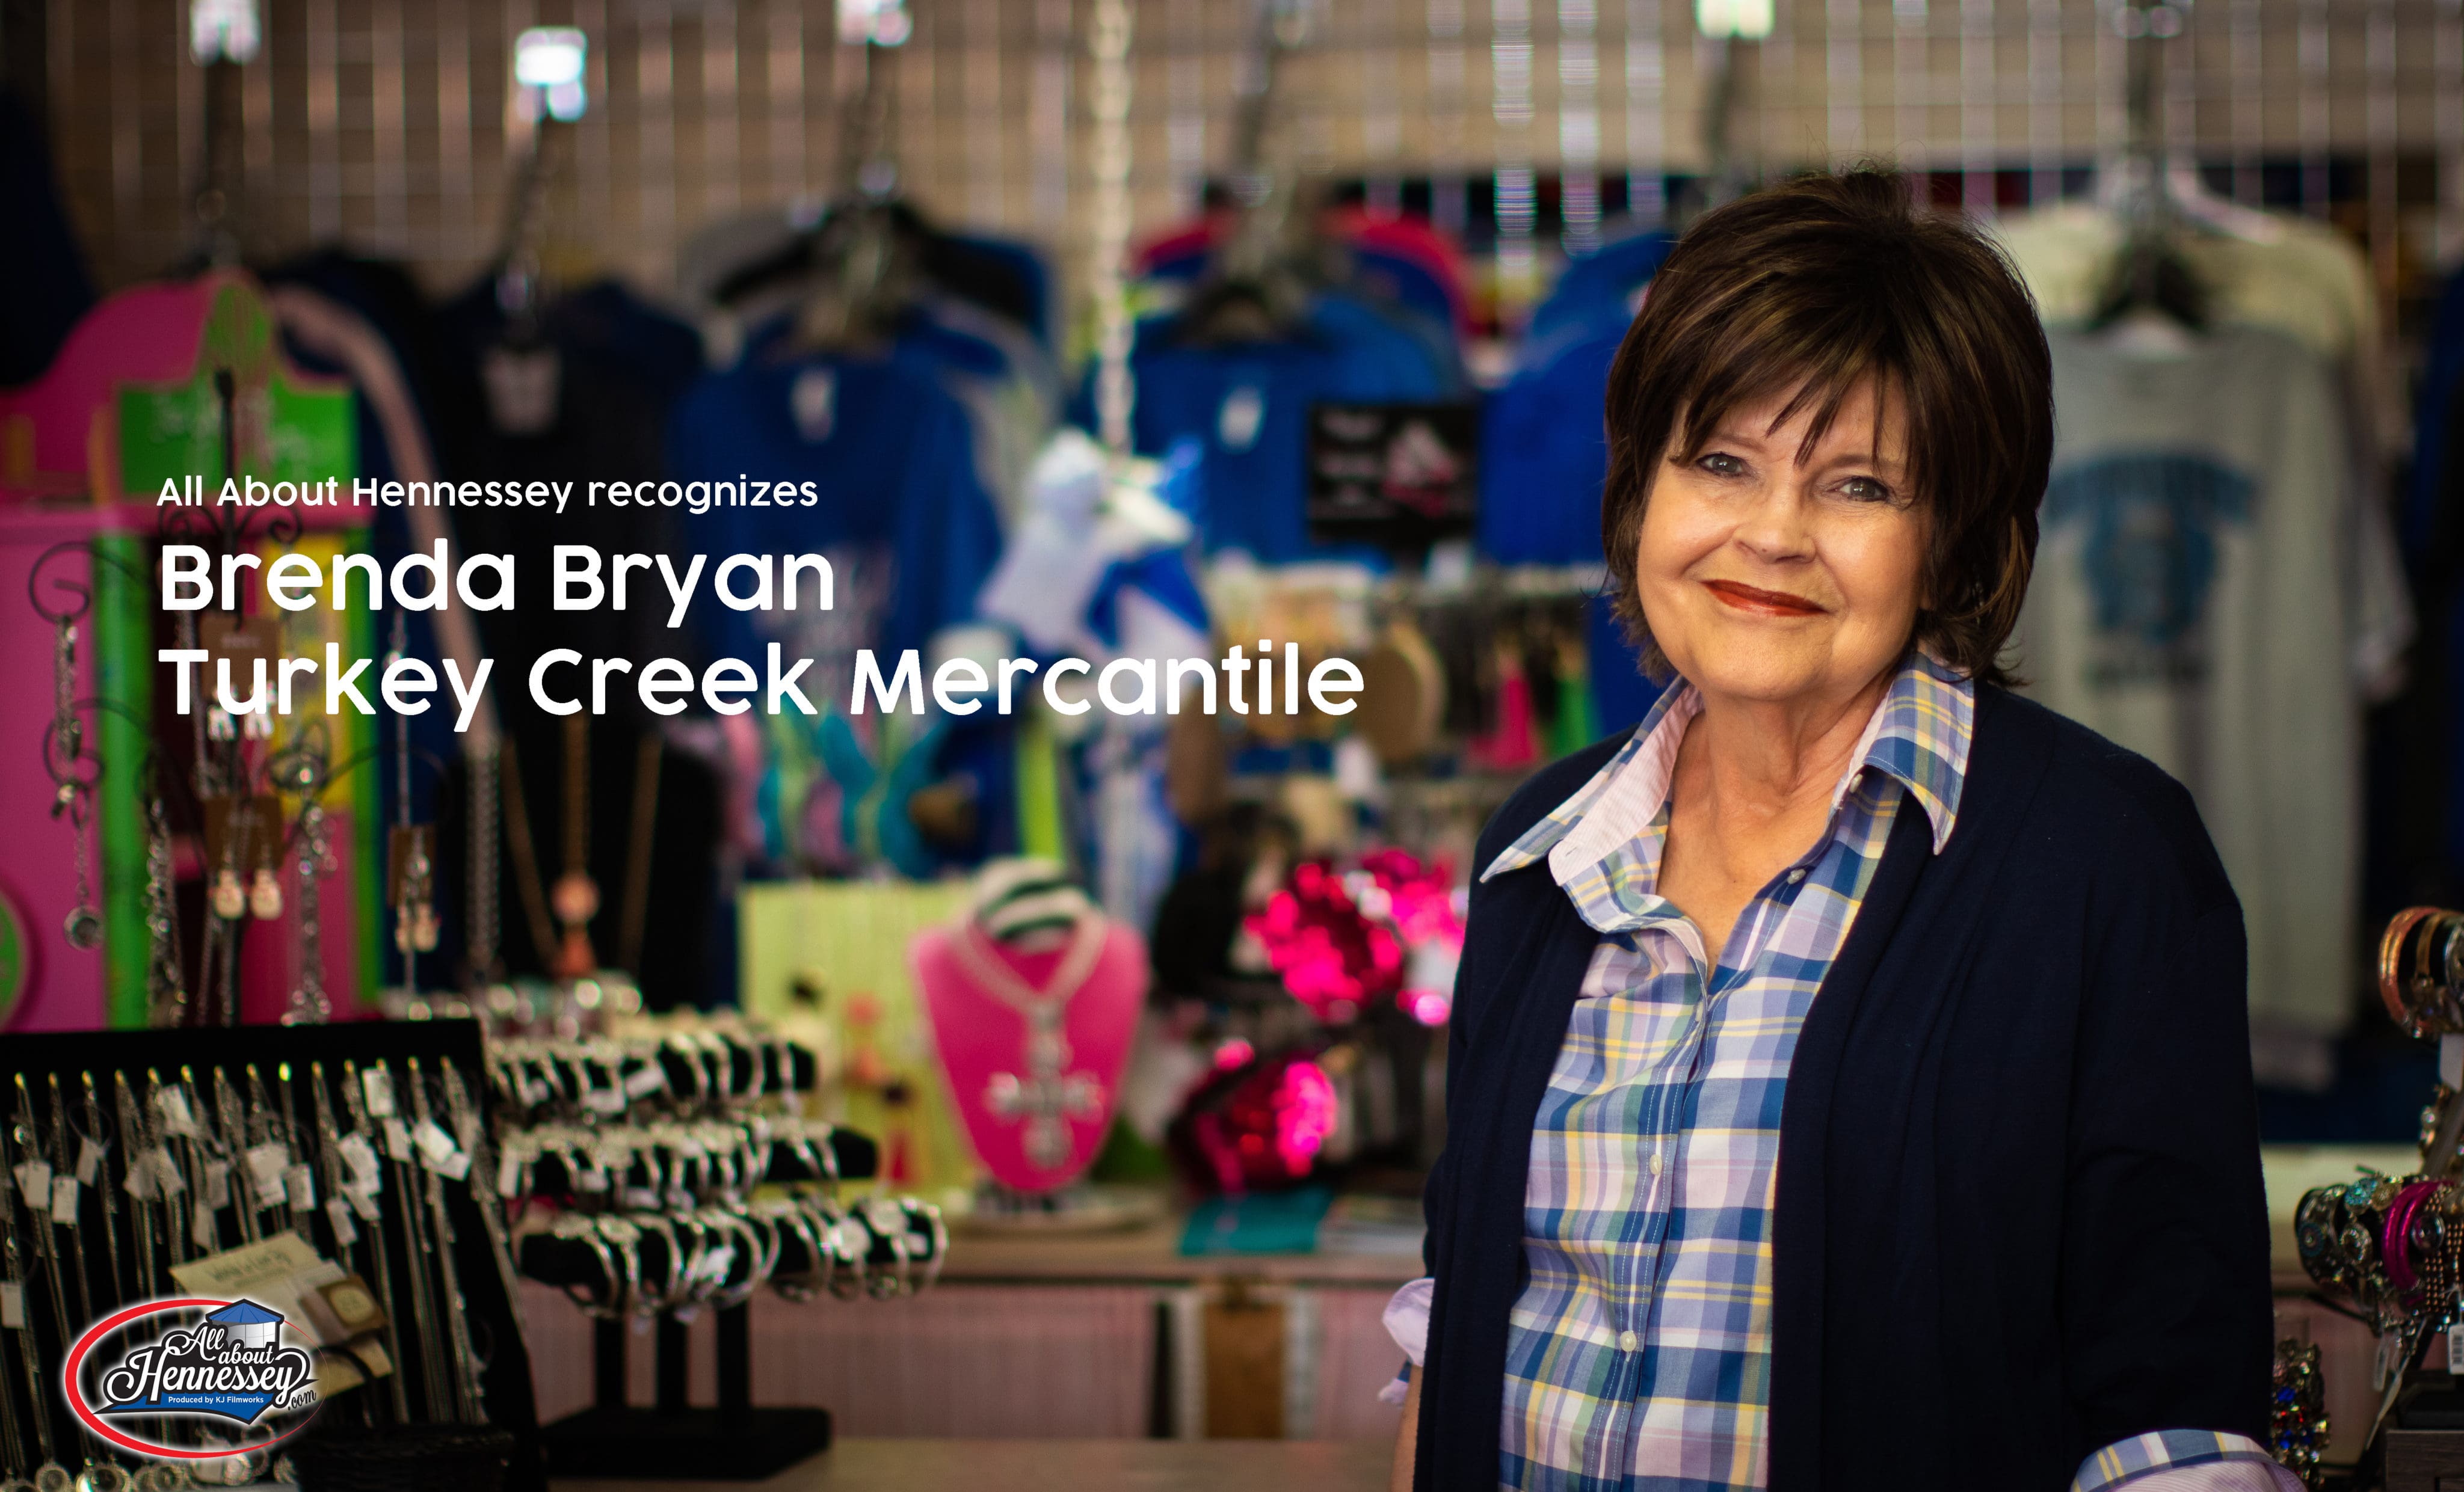 This Week All About Hennessey Recognizes Brenda Bryan of Turkey Creek Mercantile